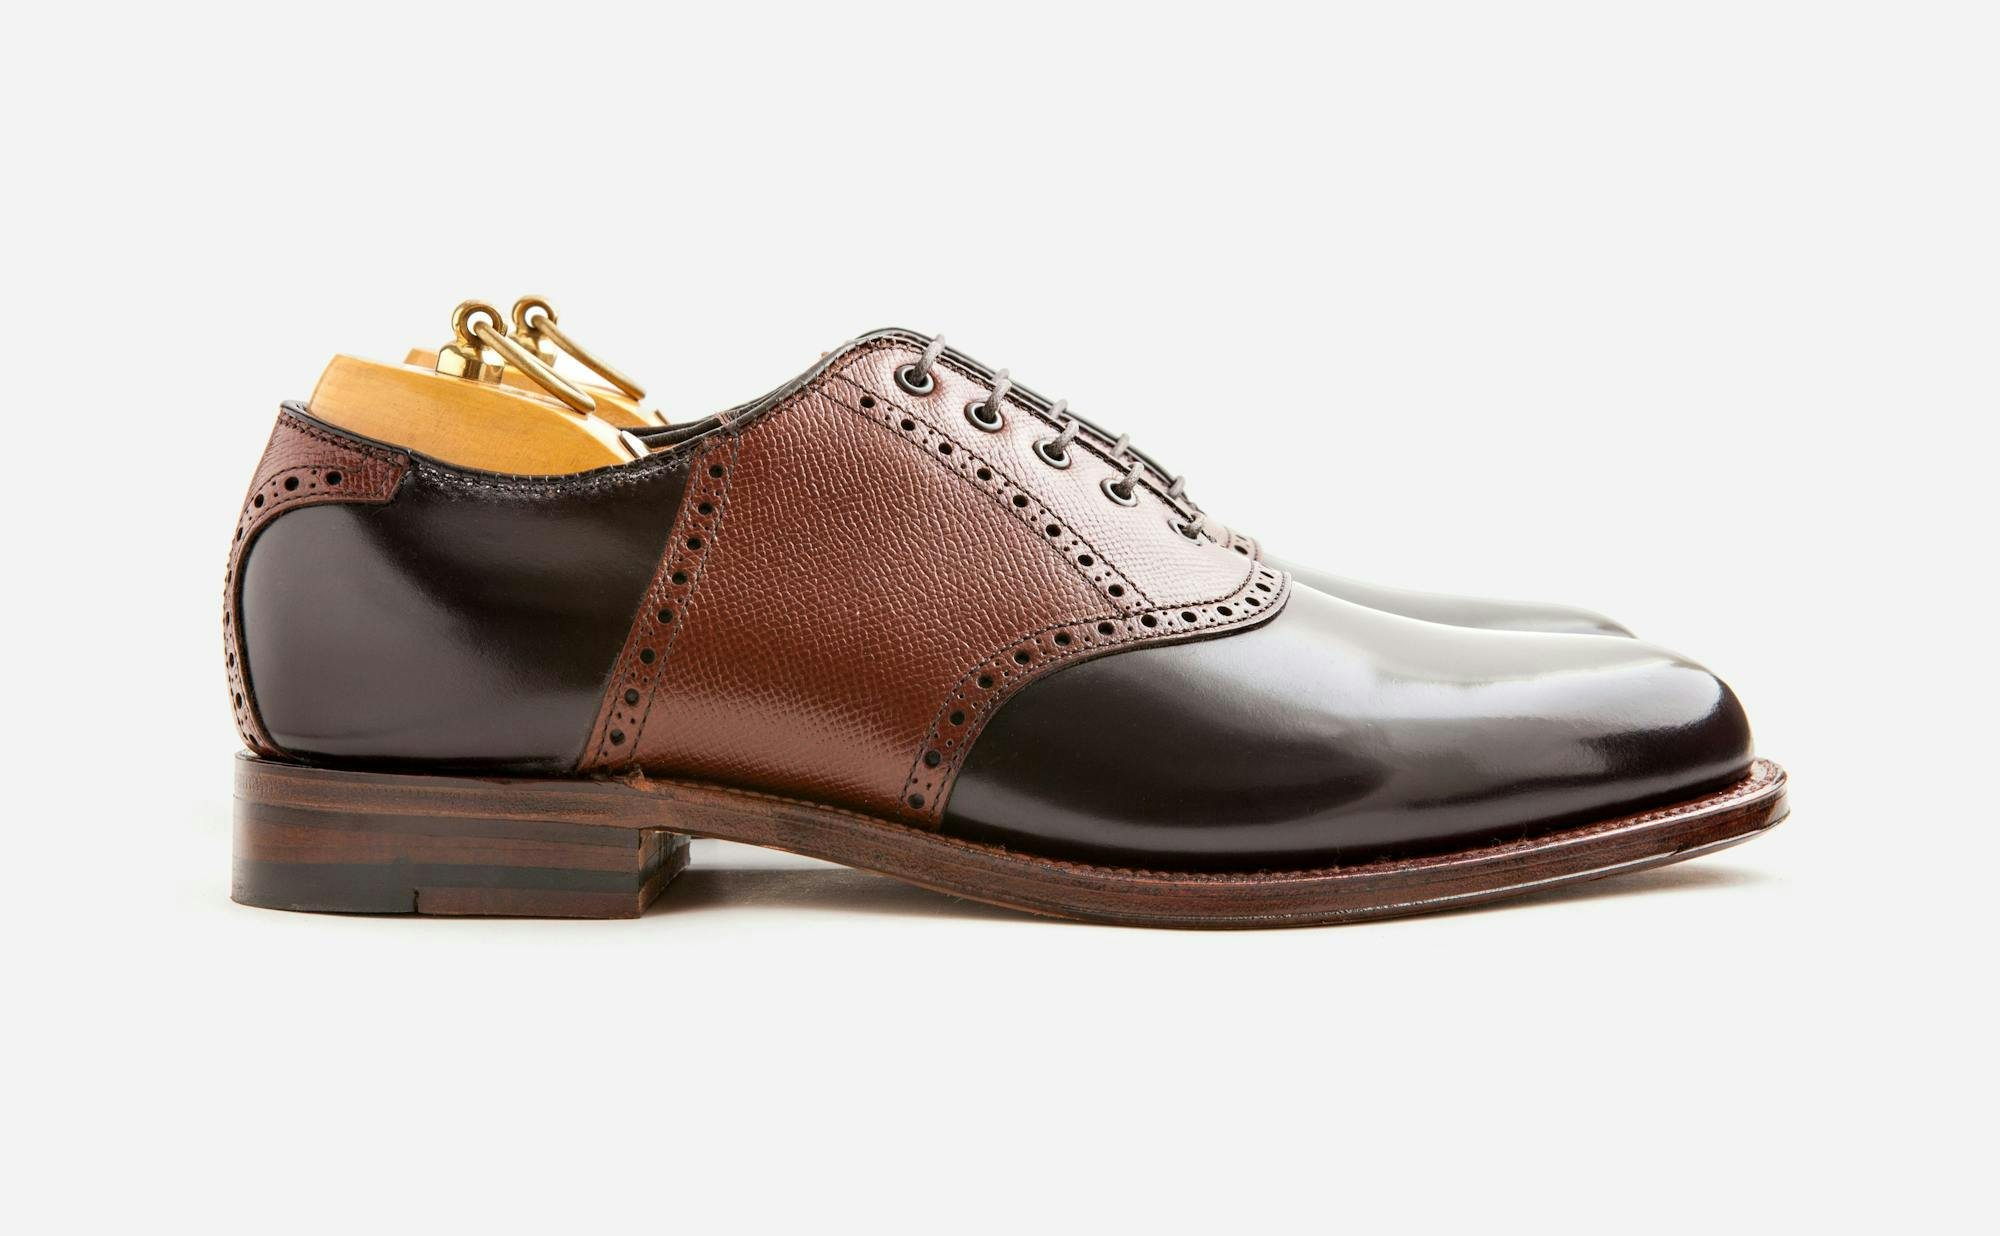 Side view of an Alden x Leffot saddle shoe in color 8 shell cordovan and brown alpine grain calfskin.